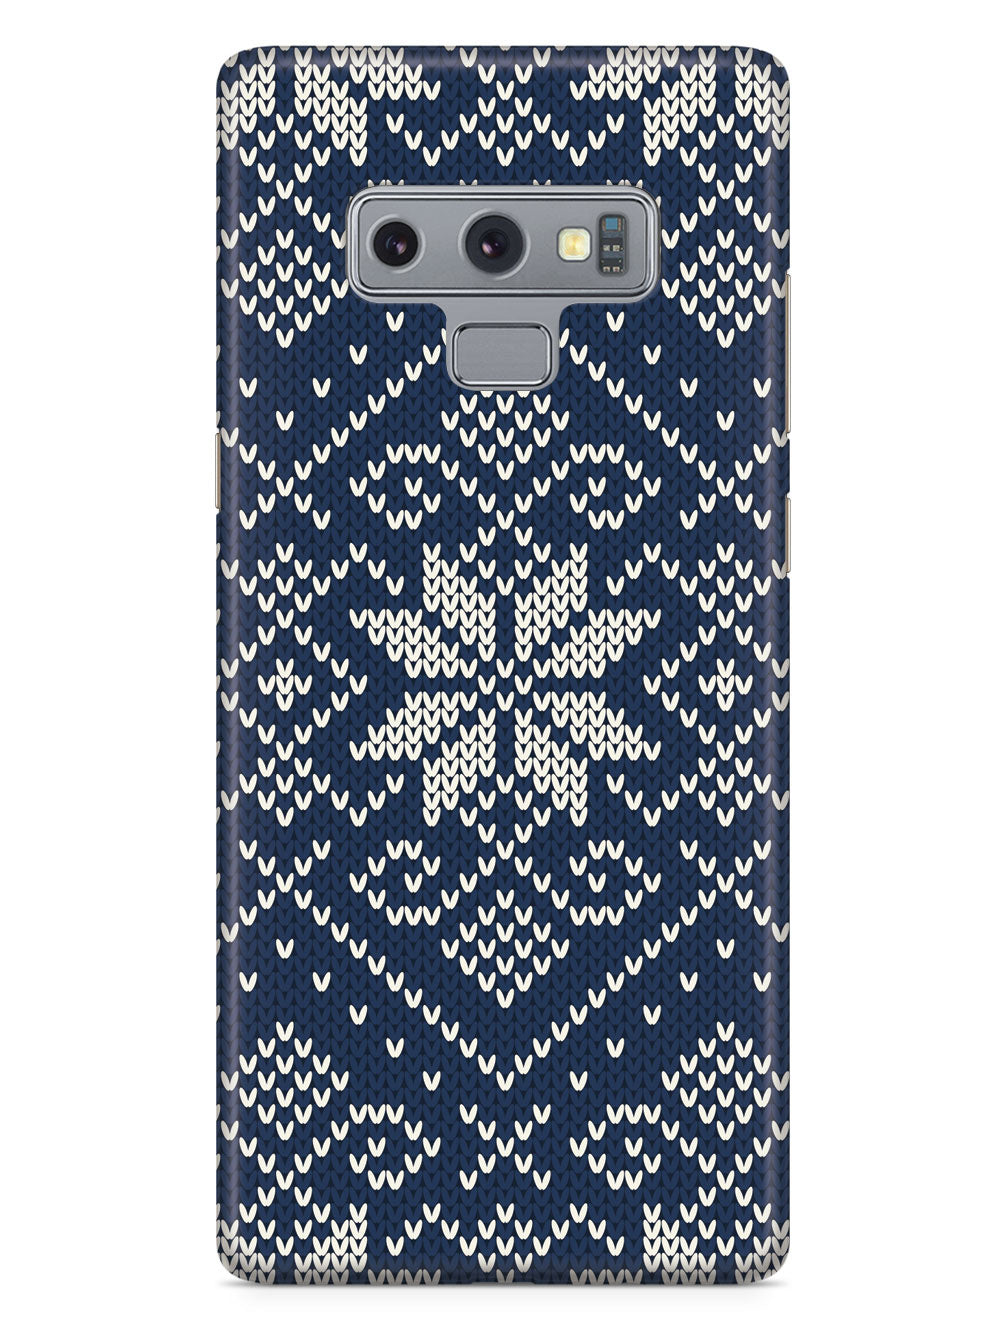 Blue and White Sweater Texturized - Black Case